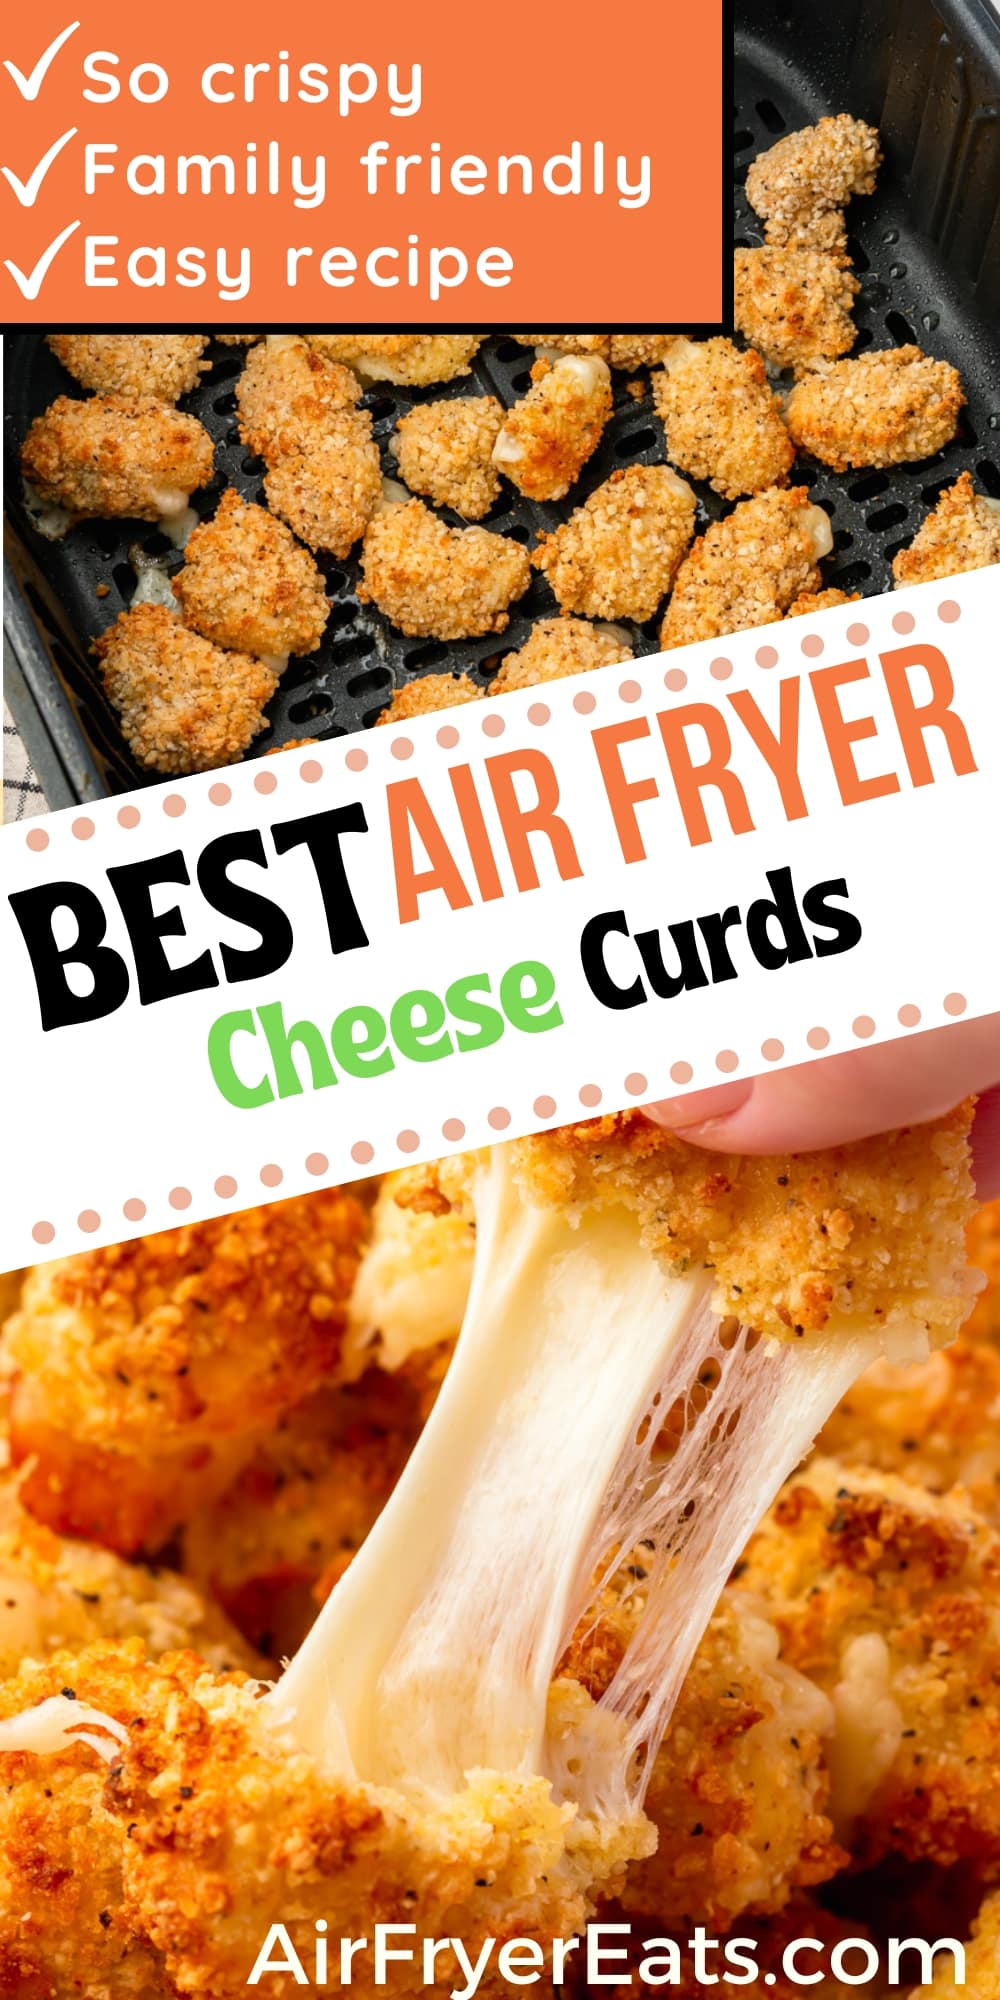 Fresh, melty, and crispy Air Fryer Cheese Curds are easy to make in the air fryer and so, so tasty! Follow this recipe to create the best cheese curds, with little oil and lots of flavor. via @vegetarianmamma